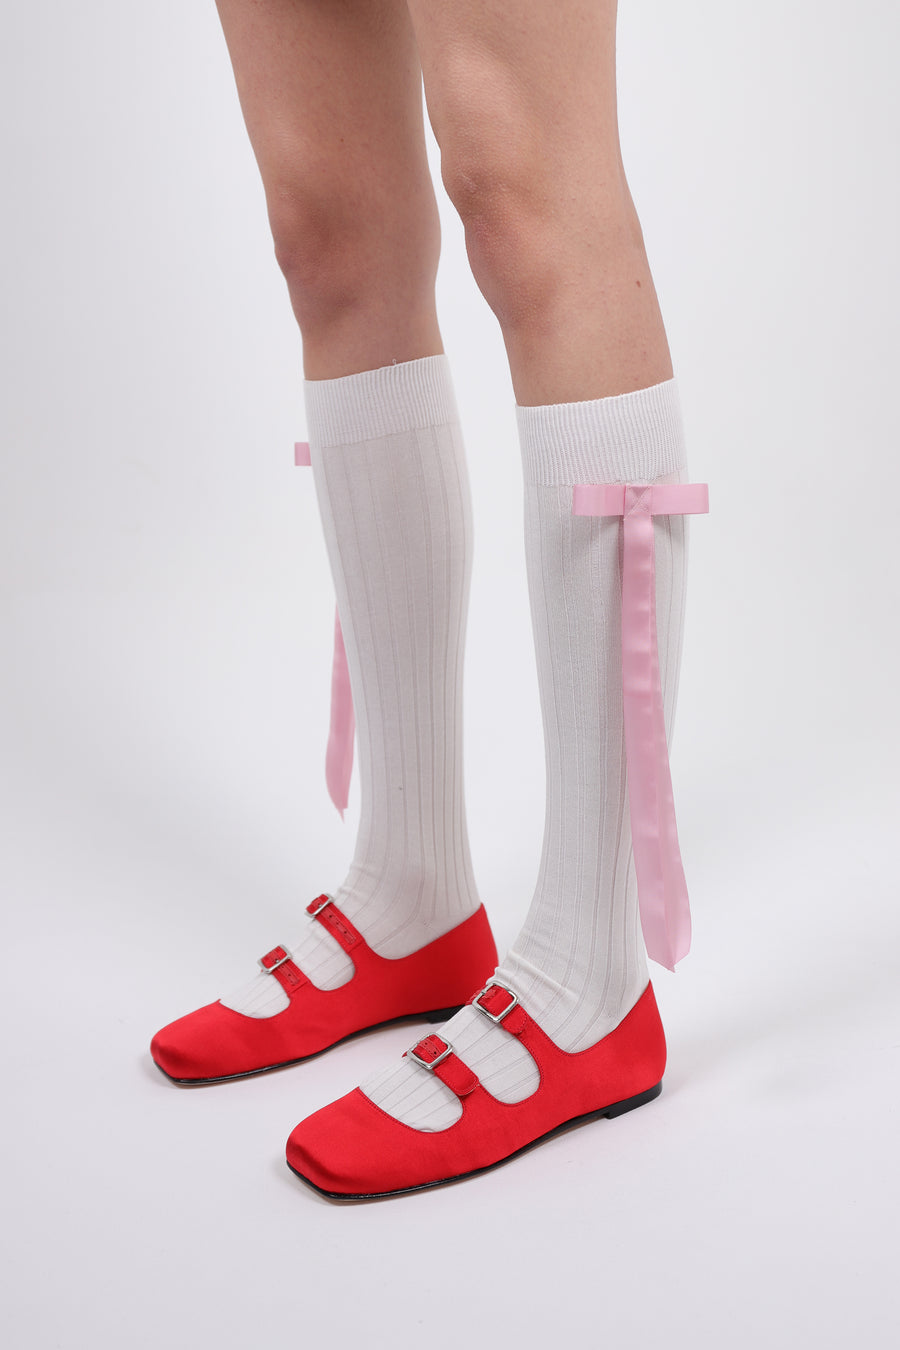 Cotton blend knee high socks in off white with pink long satin bows at side on model